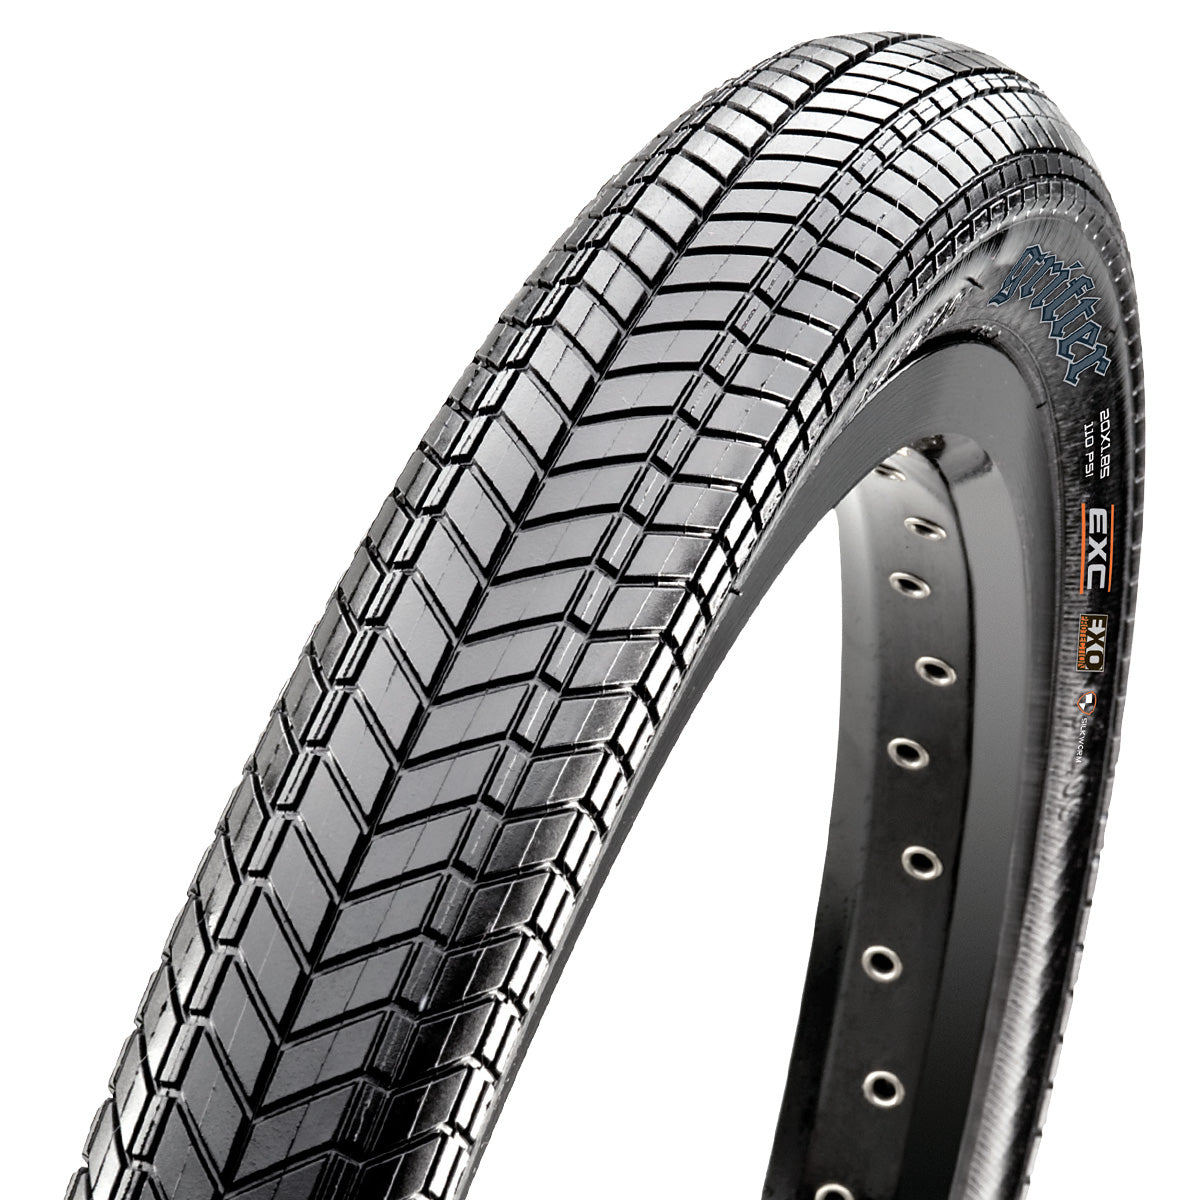 Maxxis Grifter Tyre - Dark Tan Wall - Wirebead - Single Ply - Single Compound - 2.5 Inch - 29 Inch